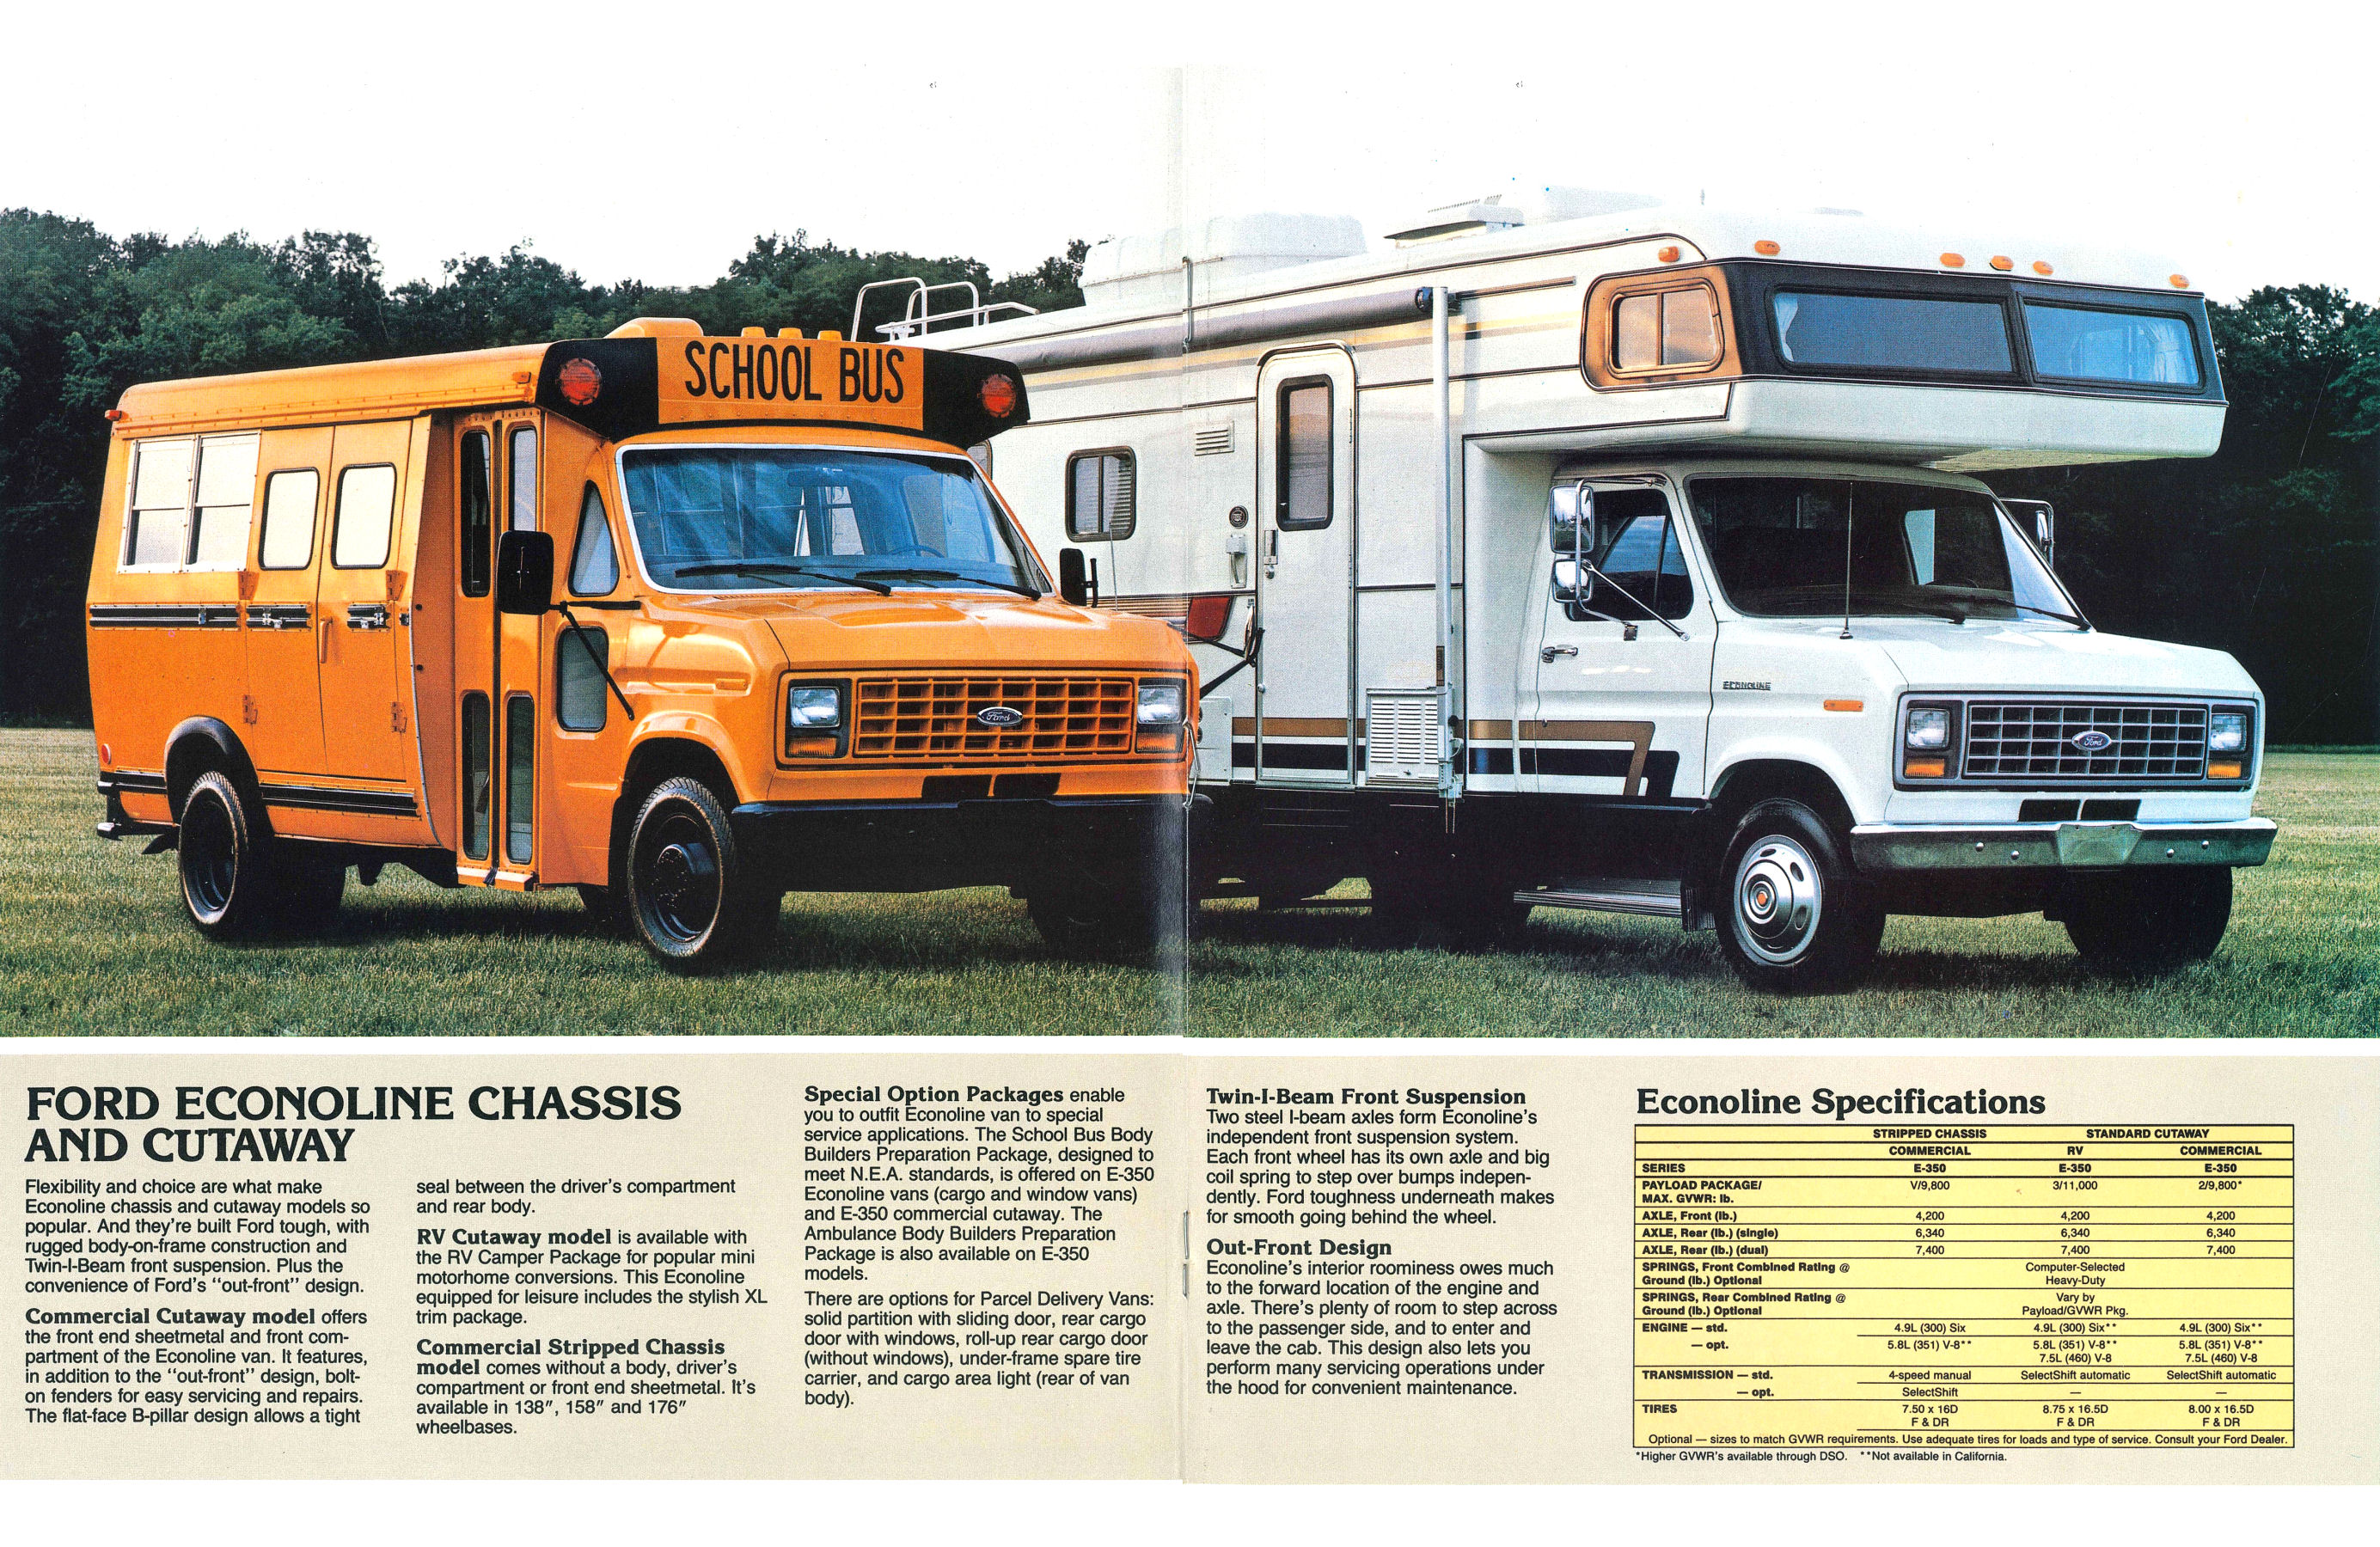 1983 Ford Chassis Cabs-04-05